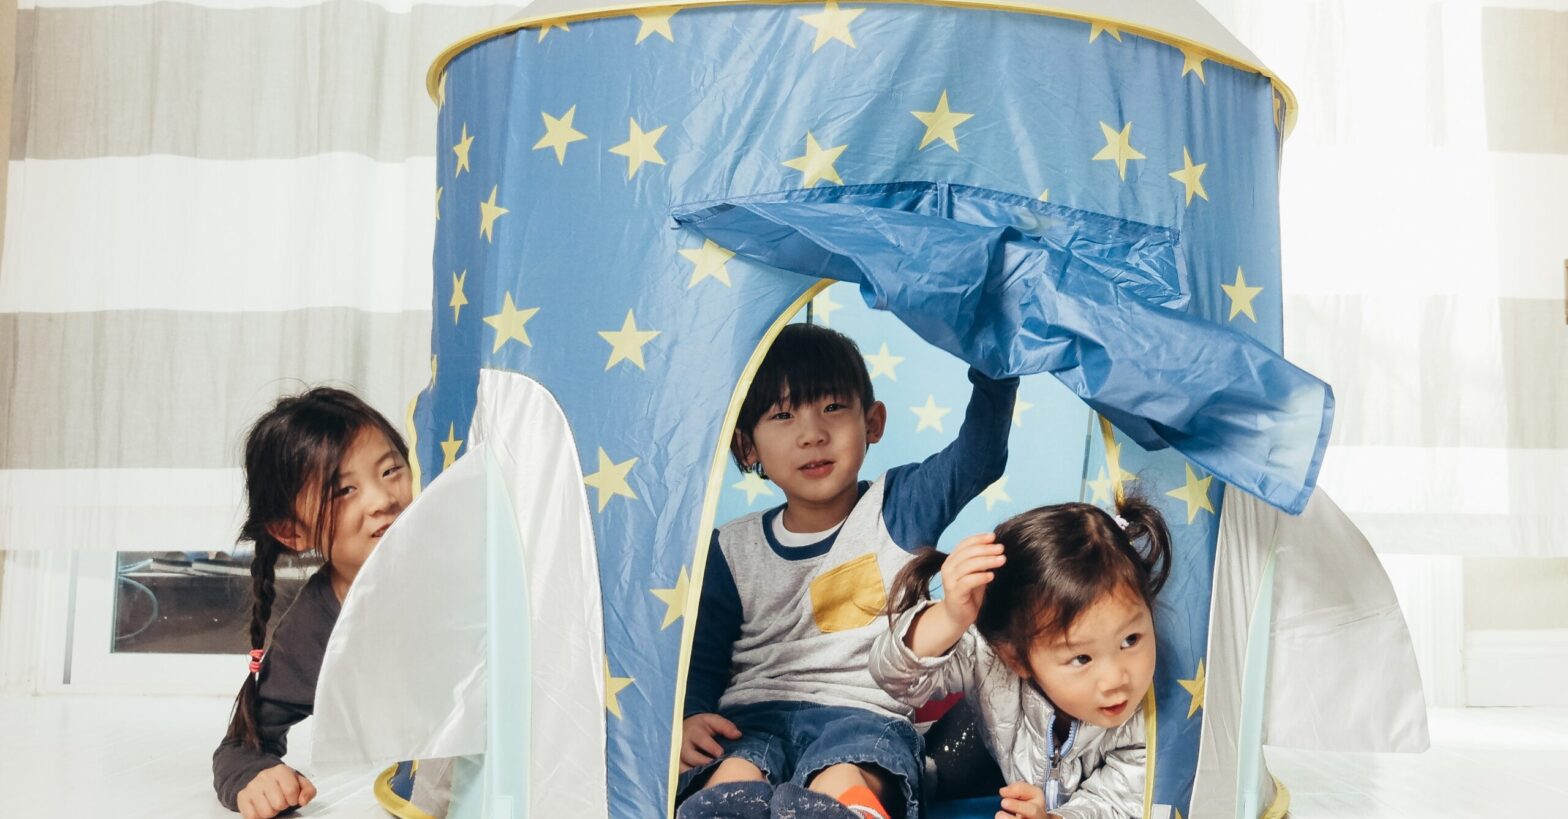 Toddlers with a tent doing indoor camping